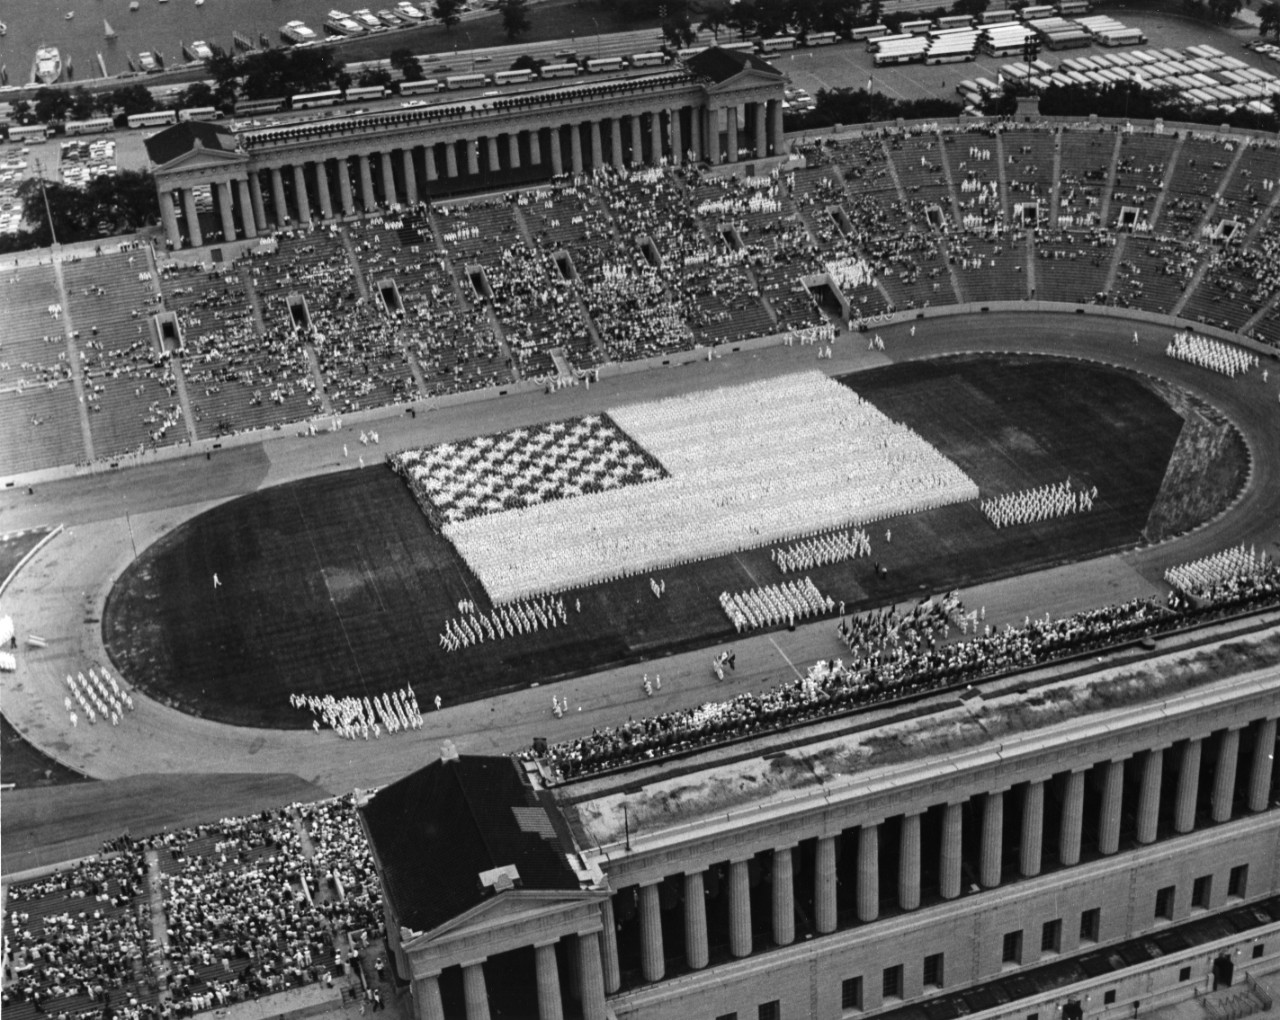 10,000 sailors from the Great Lakes Naval Training Center form a living flag at Soldier Field, Chicago.